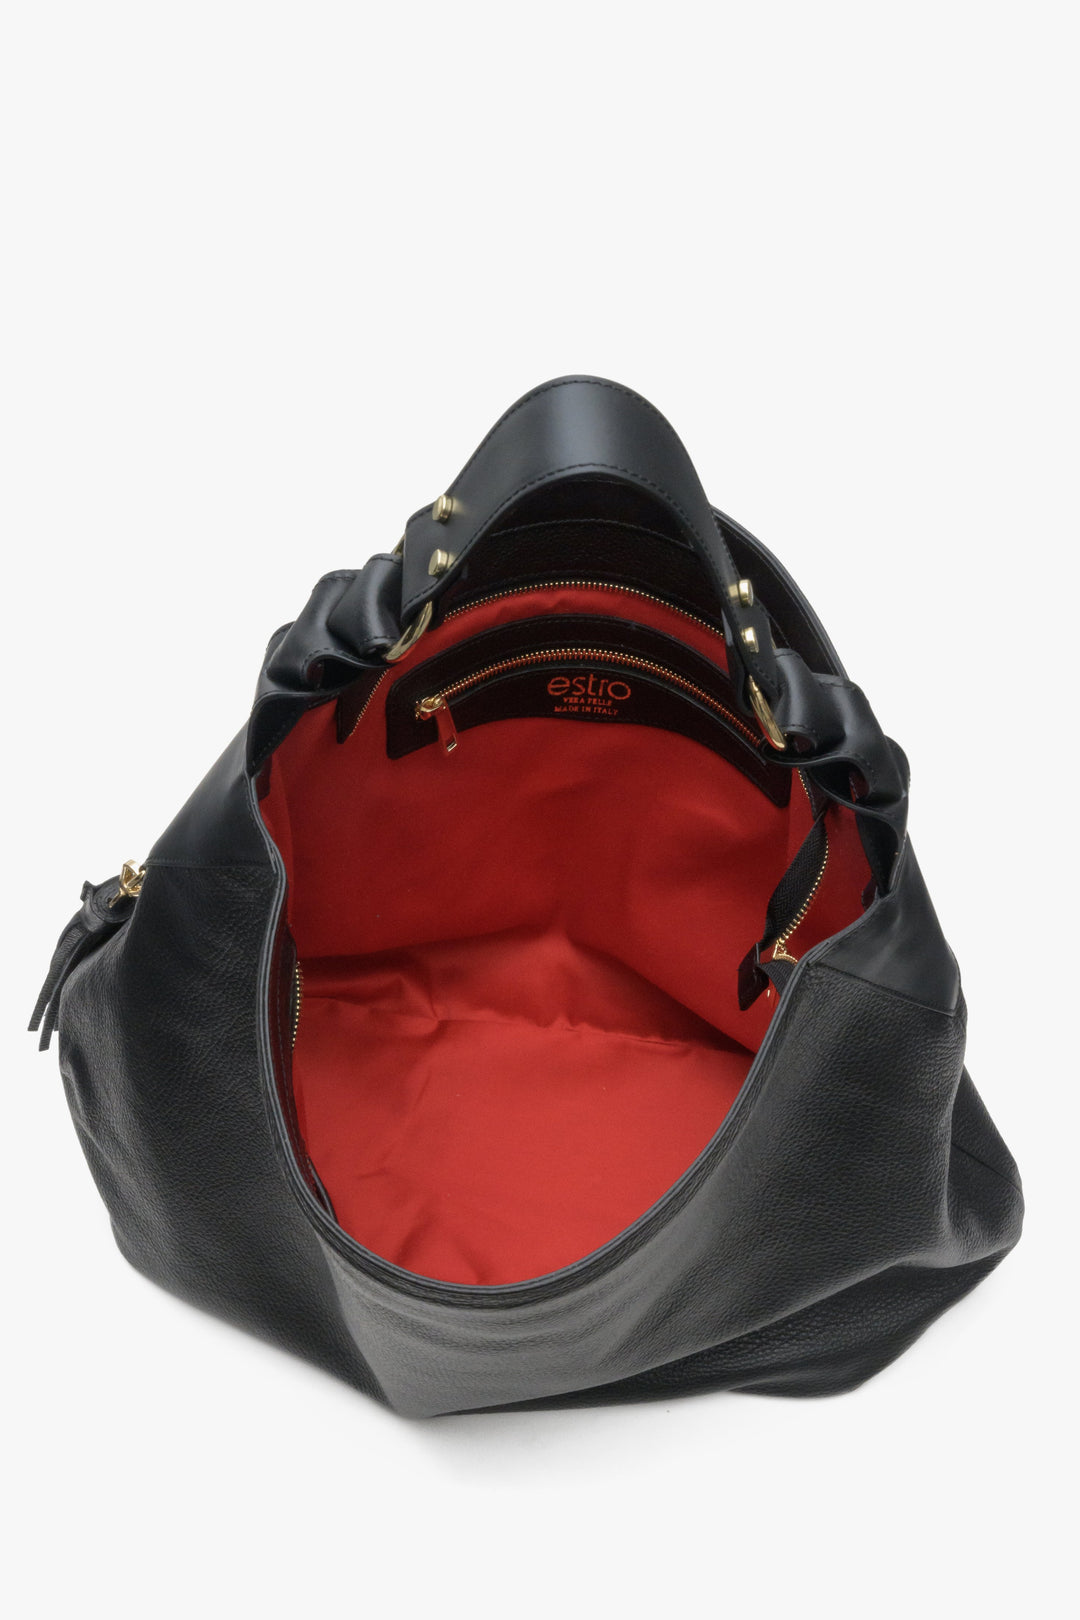 Women's black leather hobo bag - close-up of the interior model.